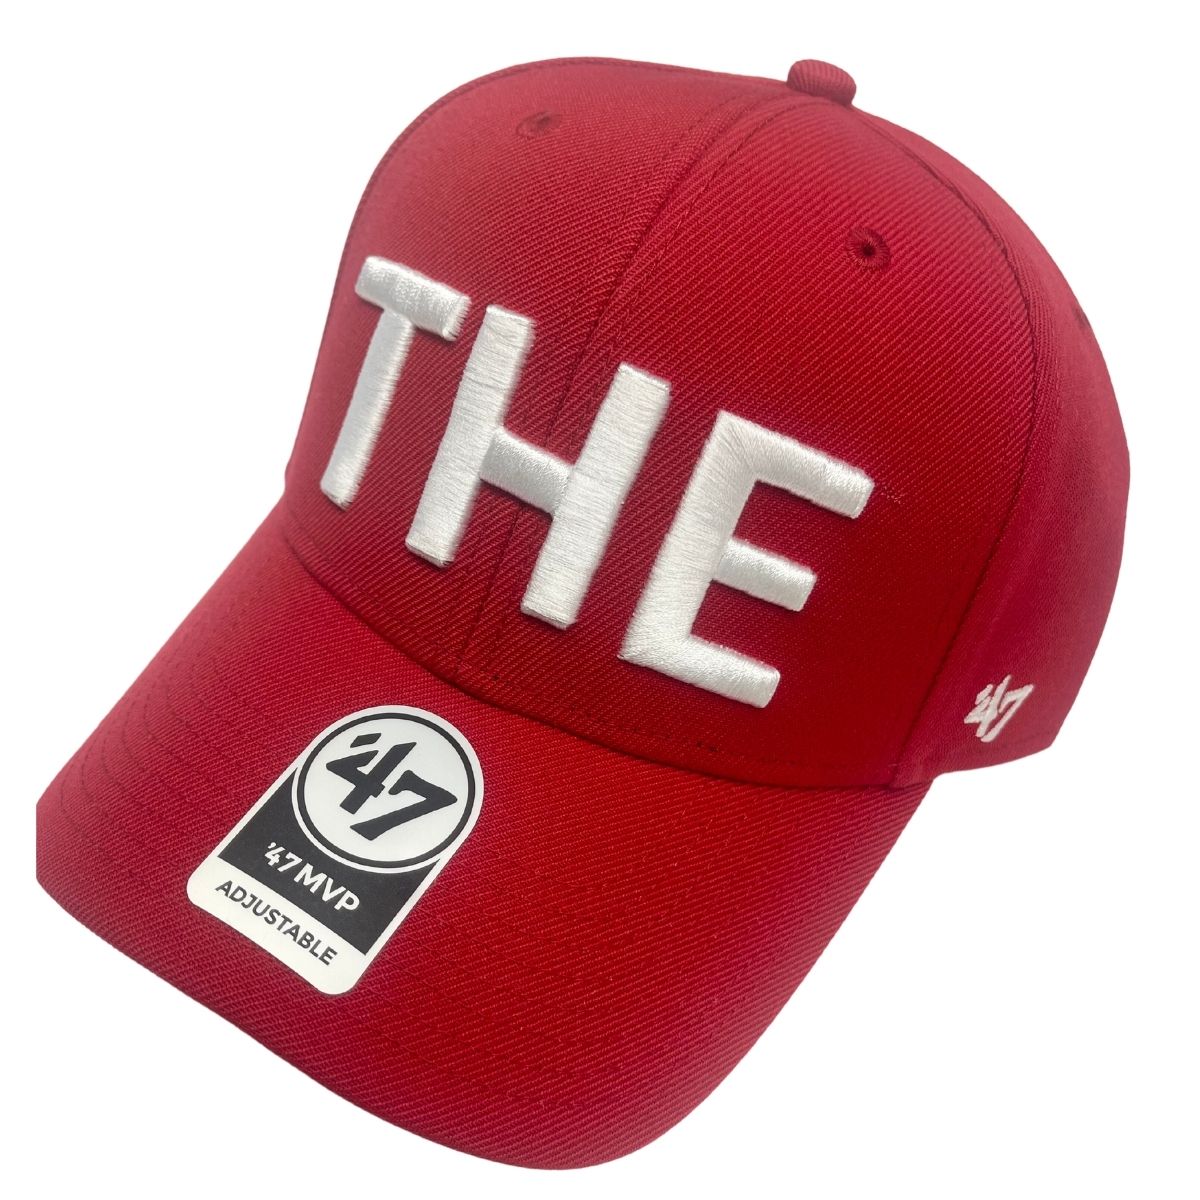 red hat with THE in white text